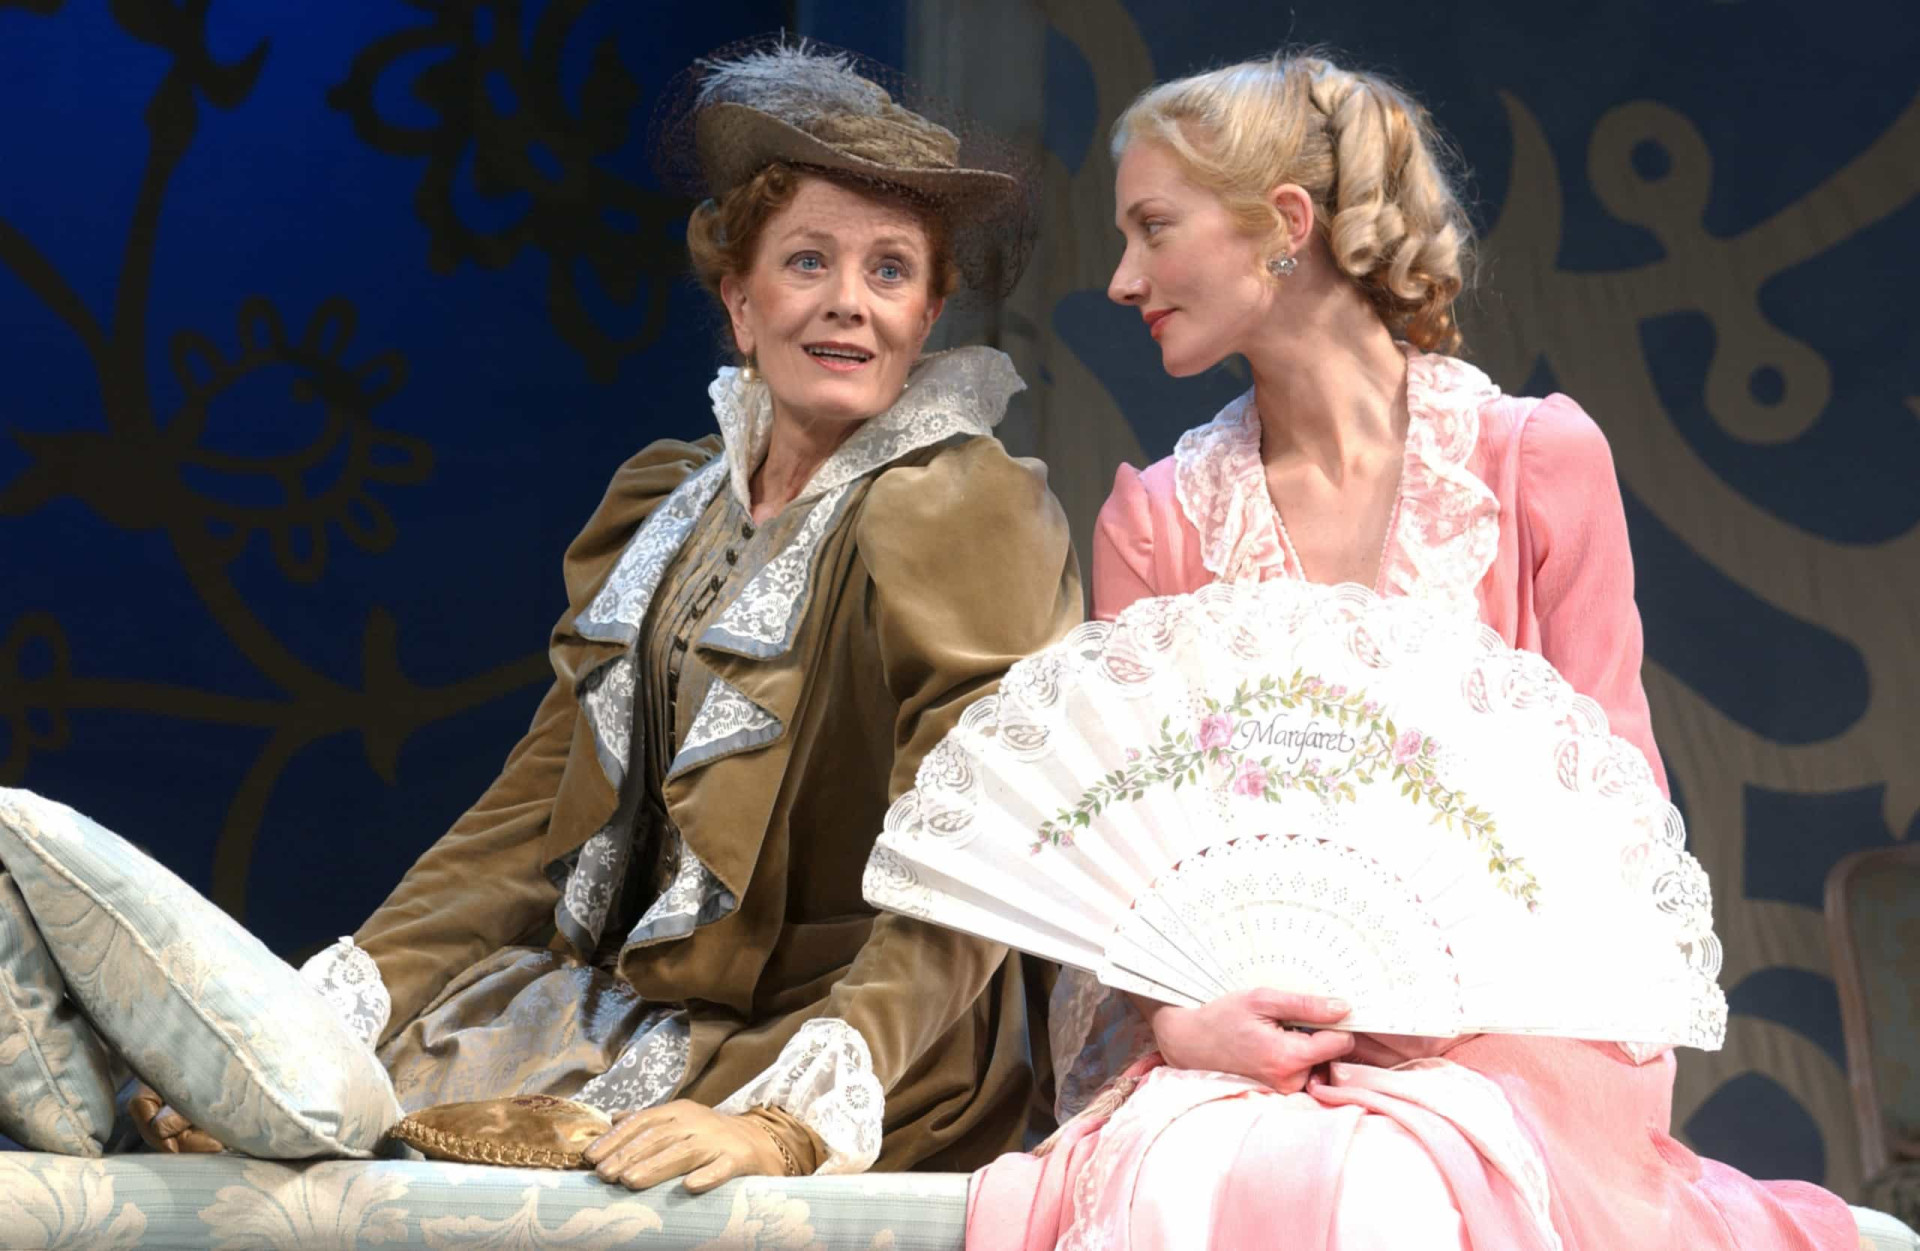 <p>Vanessa Redgrave (left) as Mrs. Erlynne and Joely Richardson as Lady Windermere star in a stage version at London's Theatre Royal. In real life, Richardson is the daughter of Redgrave.</p><p>You may also like:<a href="https://www.starsinsider.com/n/366429?utm_source=msn.com&utm_medium=display&utm_campaign=referral_description&utm_content=443911v5en-us"> Celebrities who were poor before fame found them</a></p>